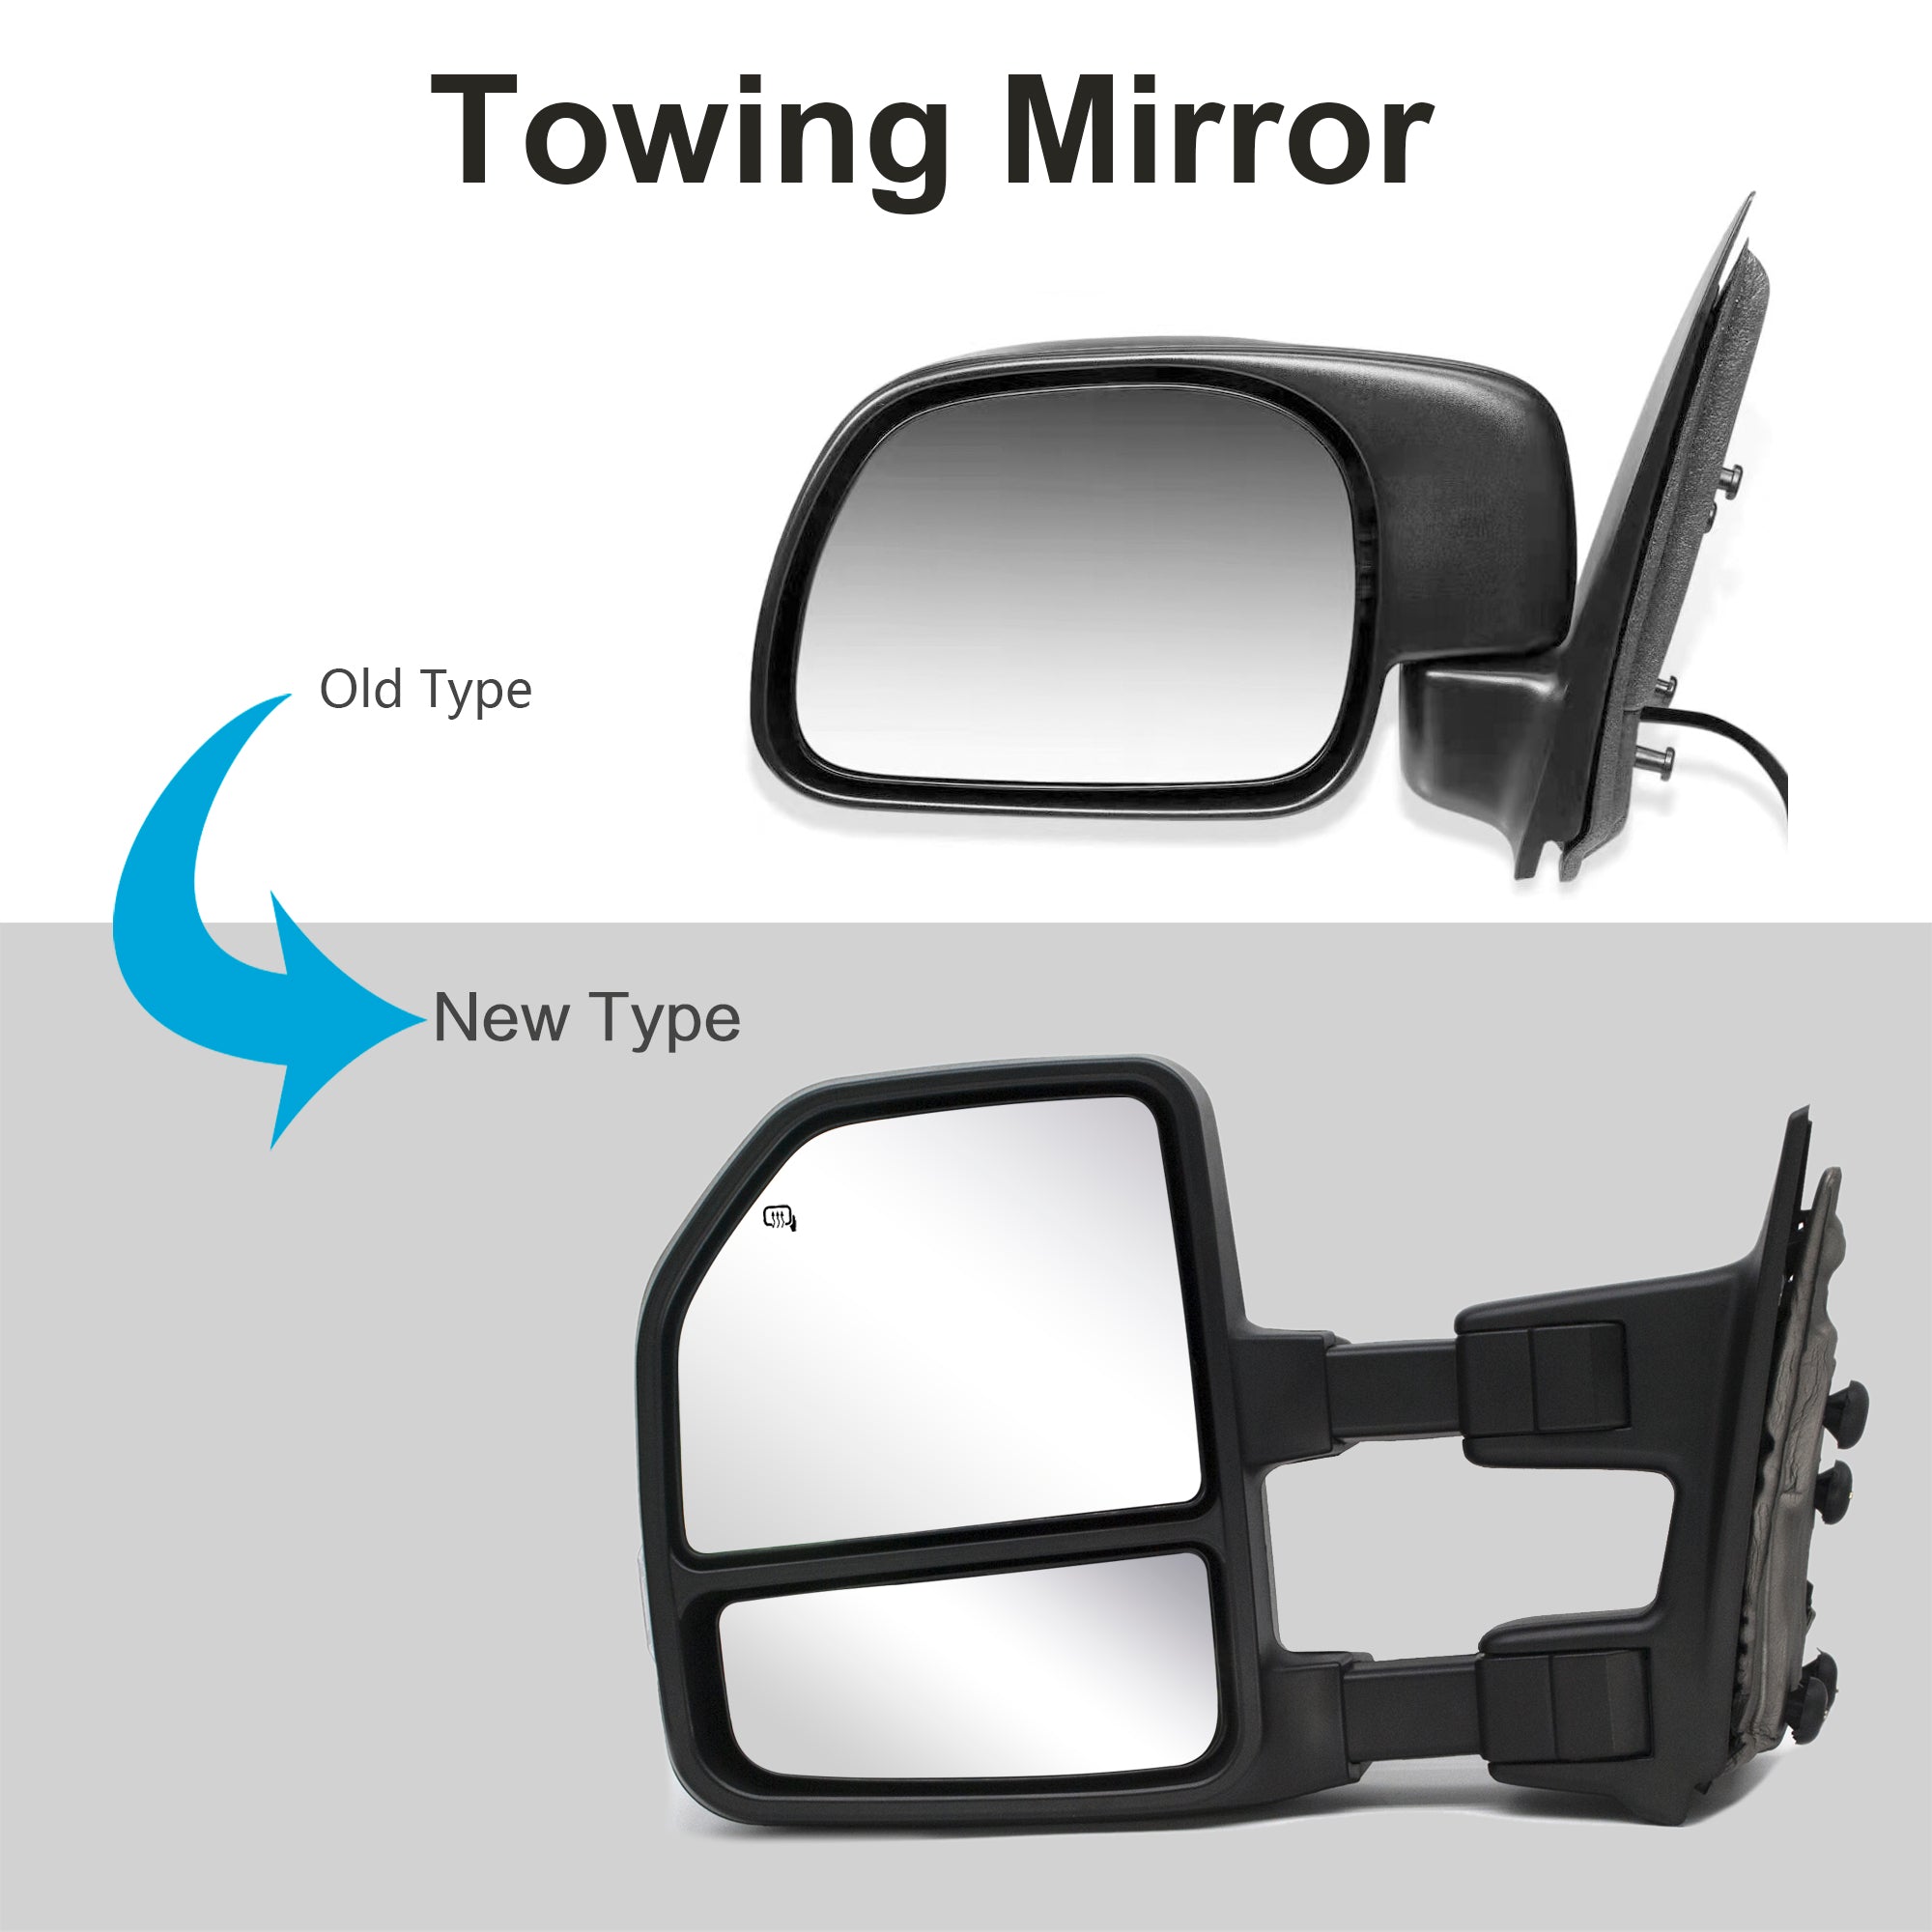 Towing Mirrors for 1999-2016 Ford F250/350/450/550 Super Duty Power Heated Turn Signal Clearance Lamp, Chrome Cap 20C